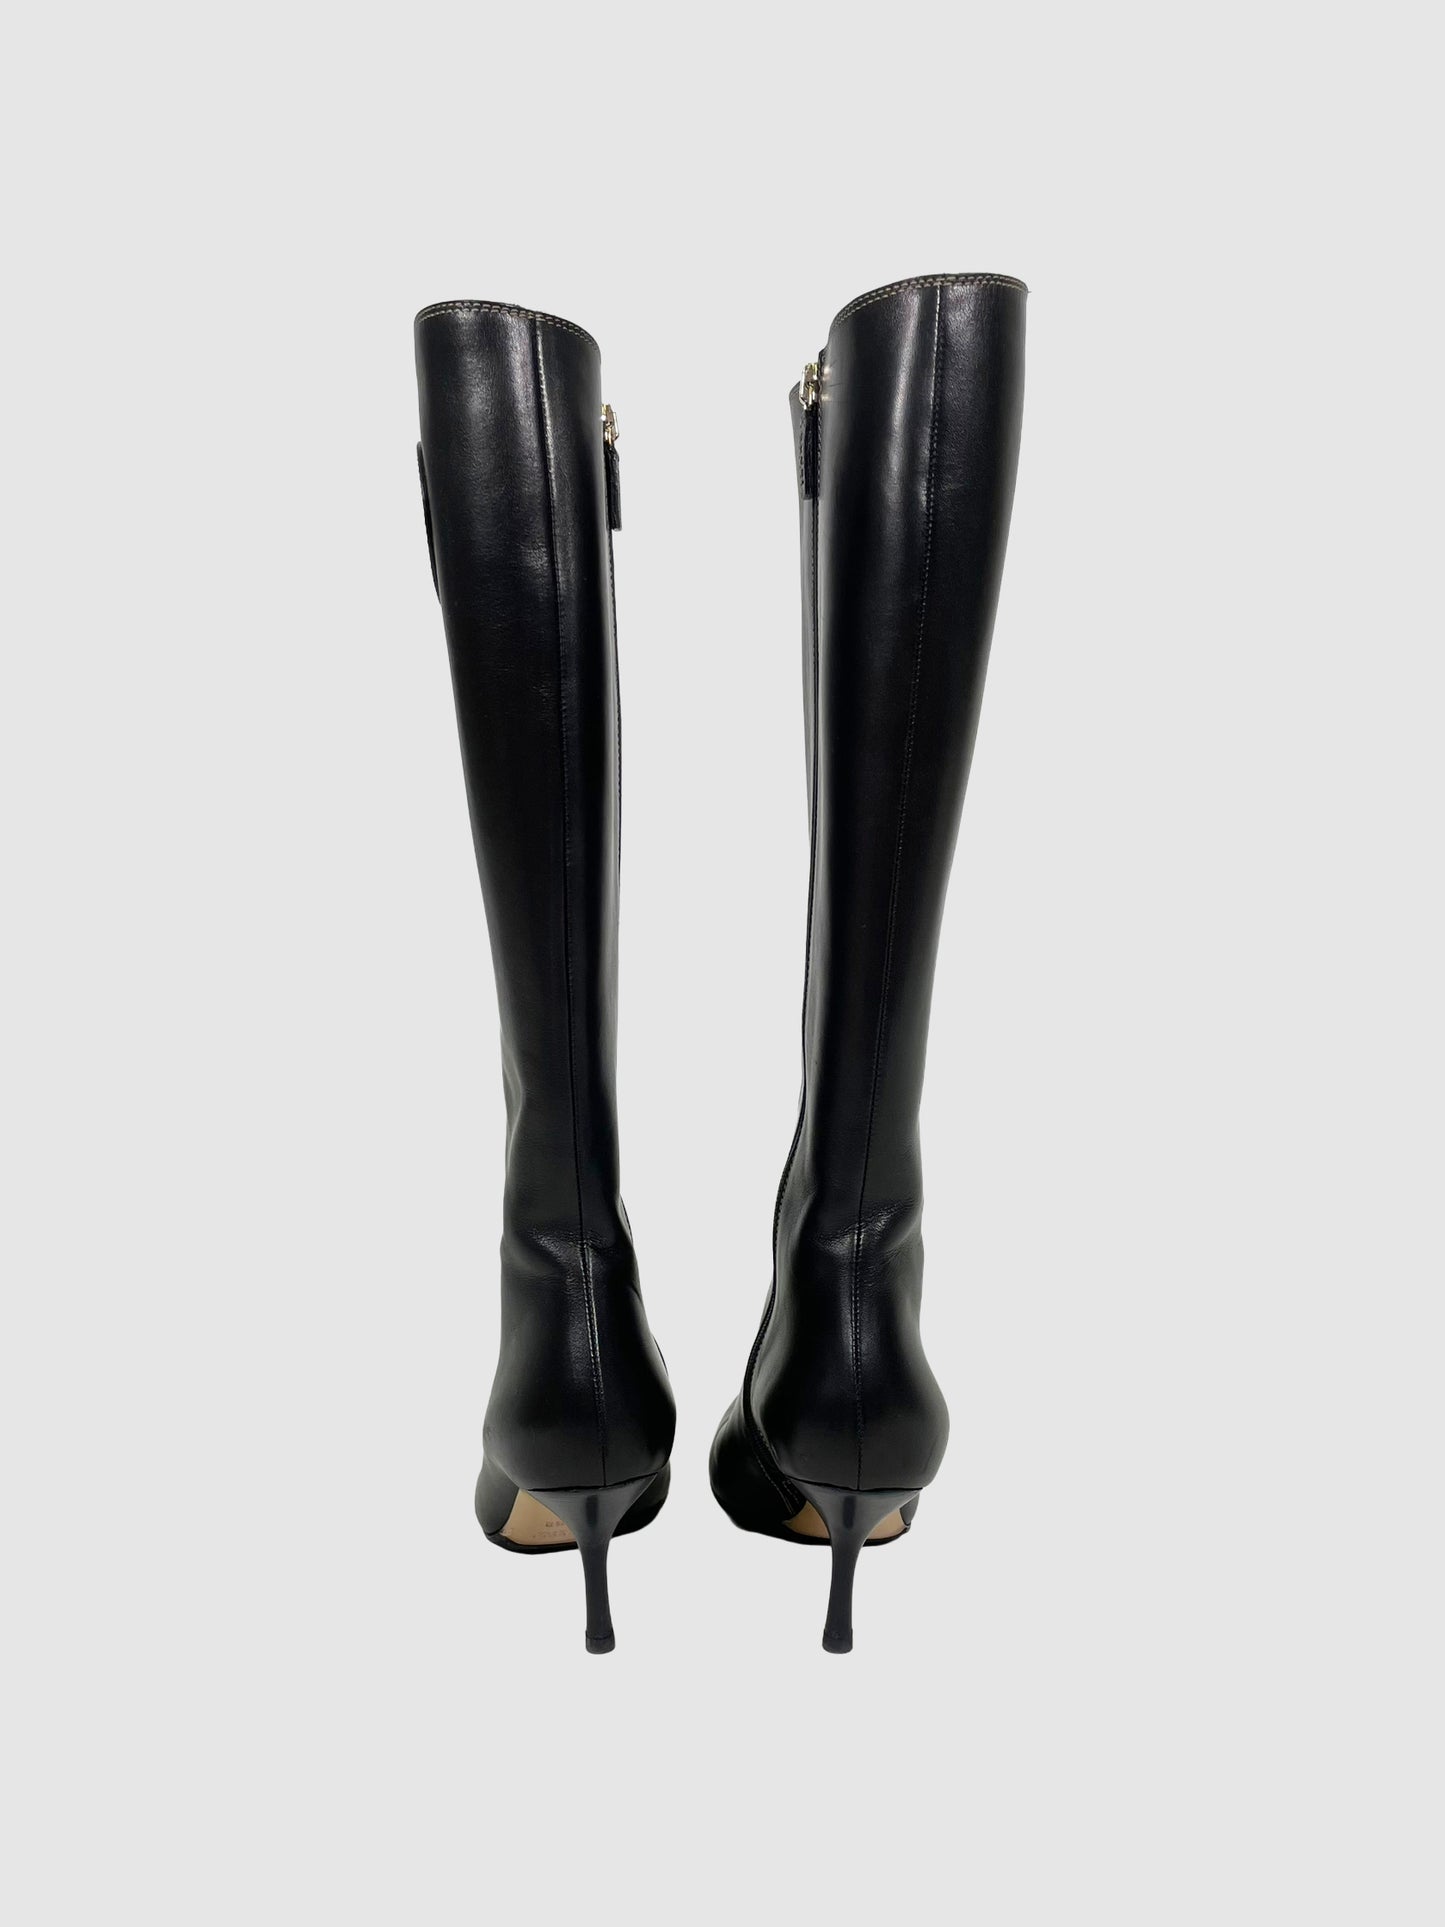 Gucci Leather Knee-High Boots - Size 6.5